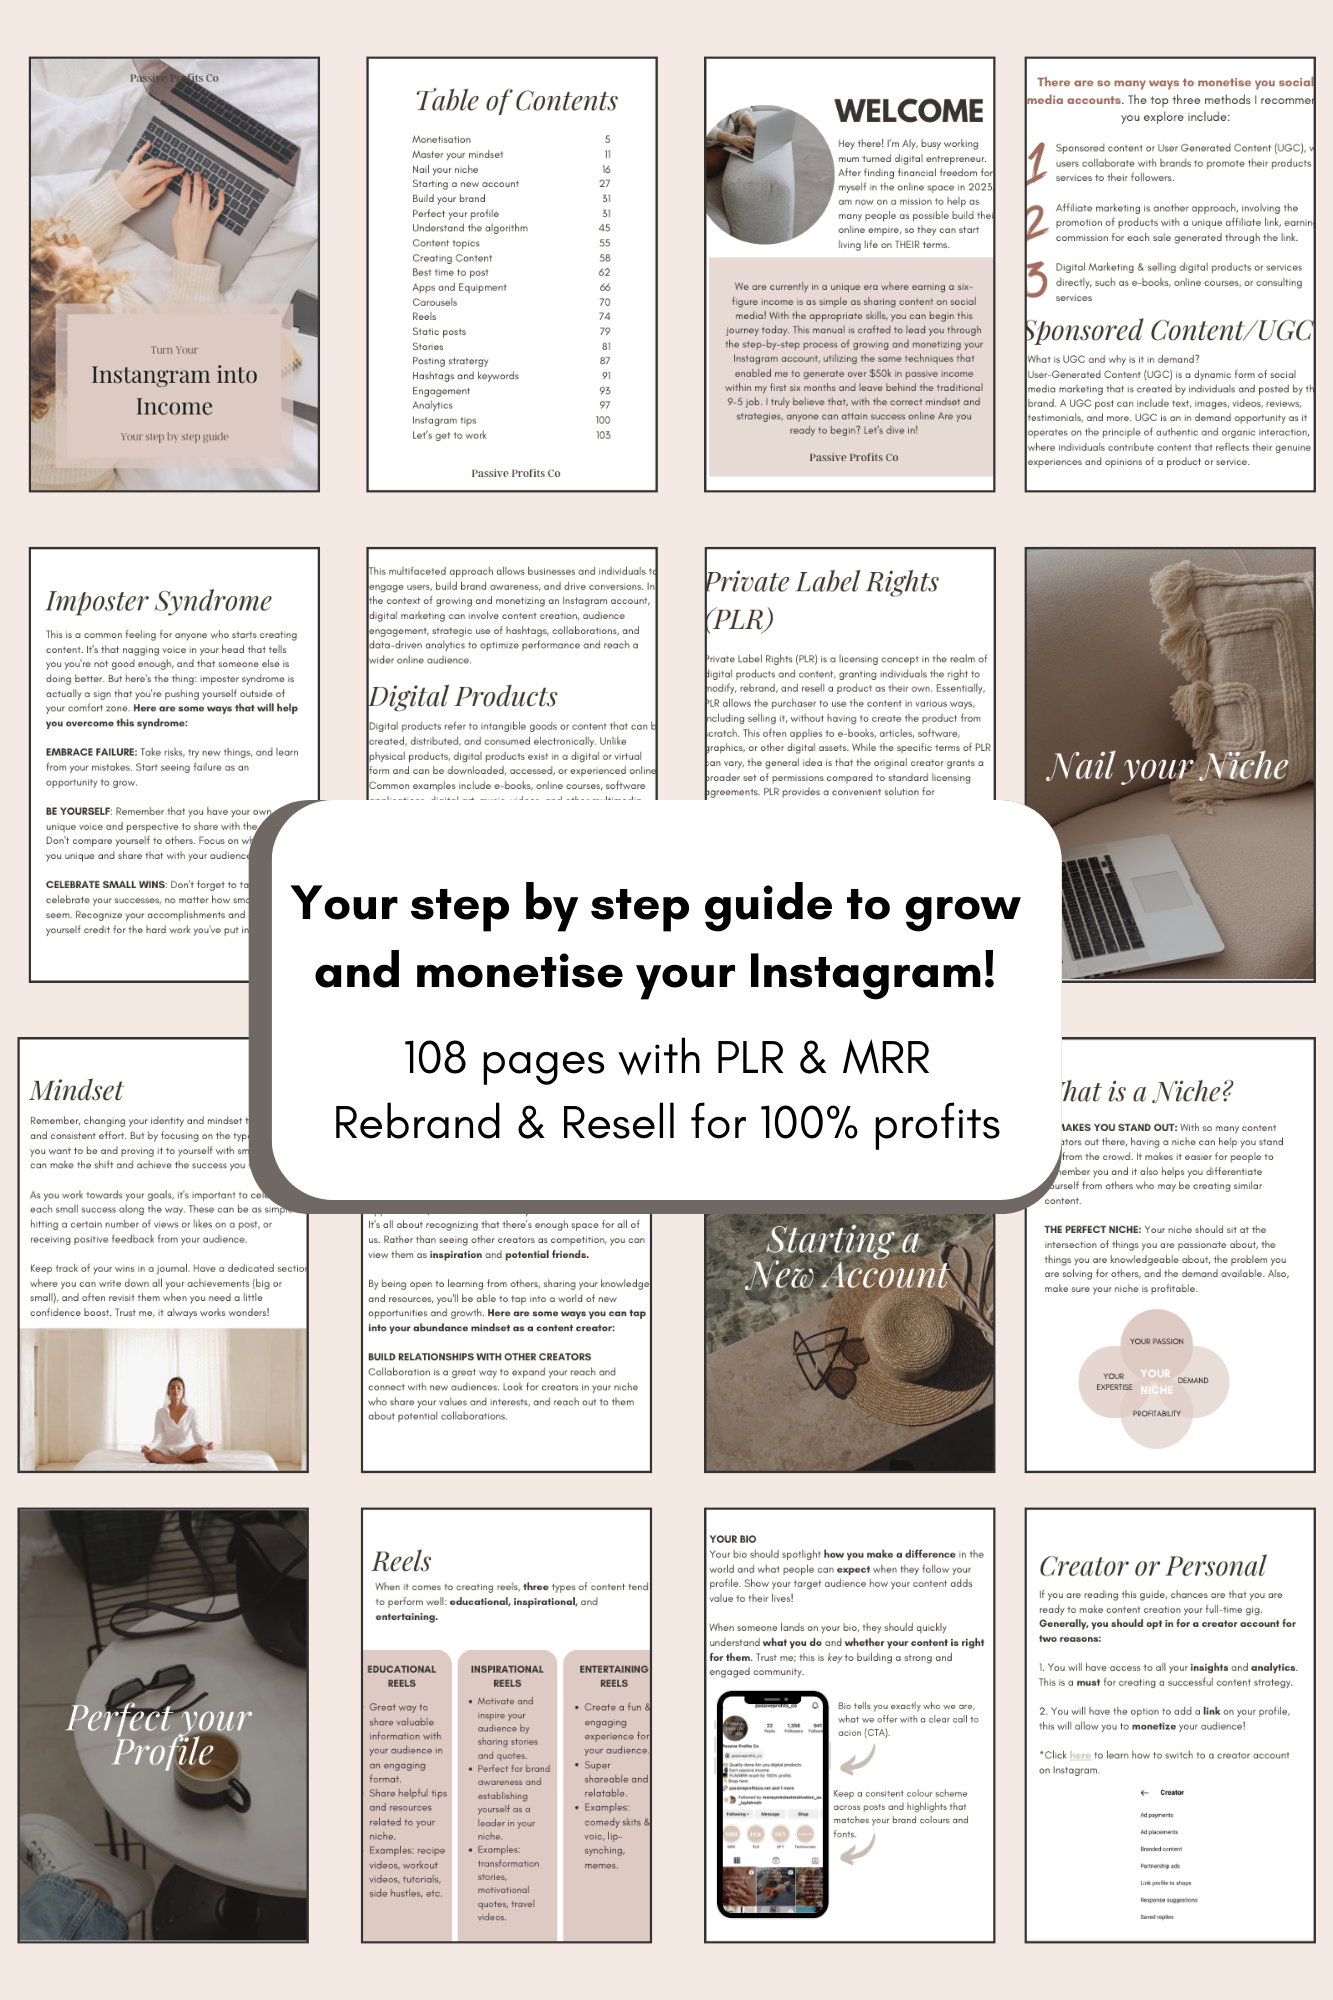 Turn your Instagram into Income